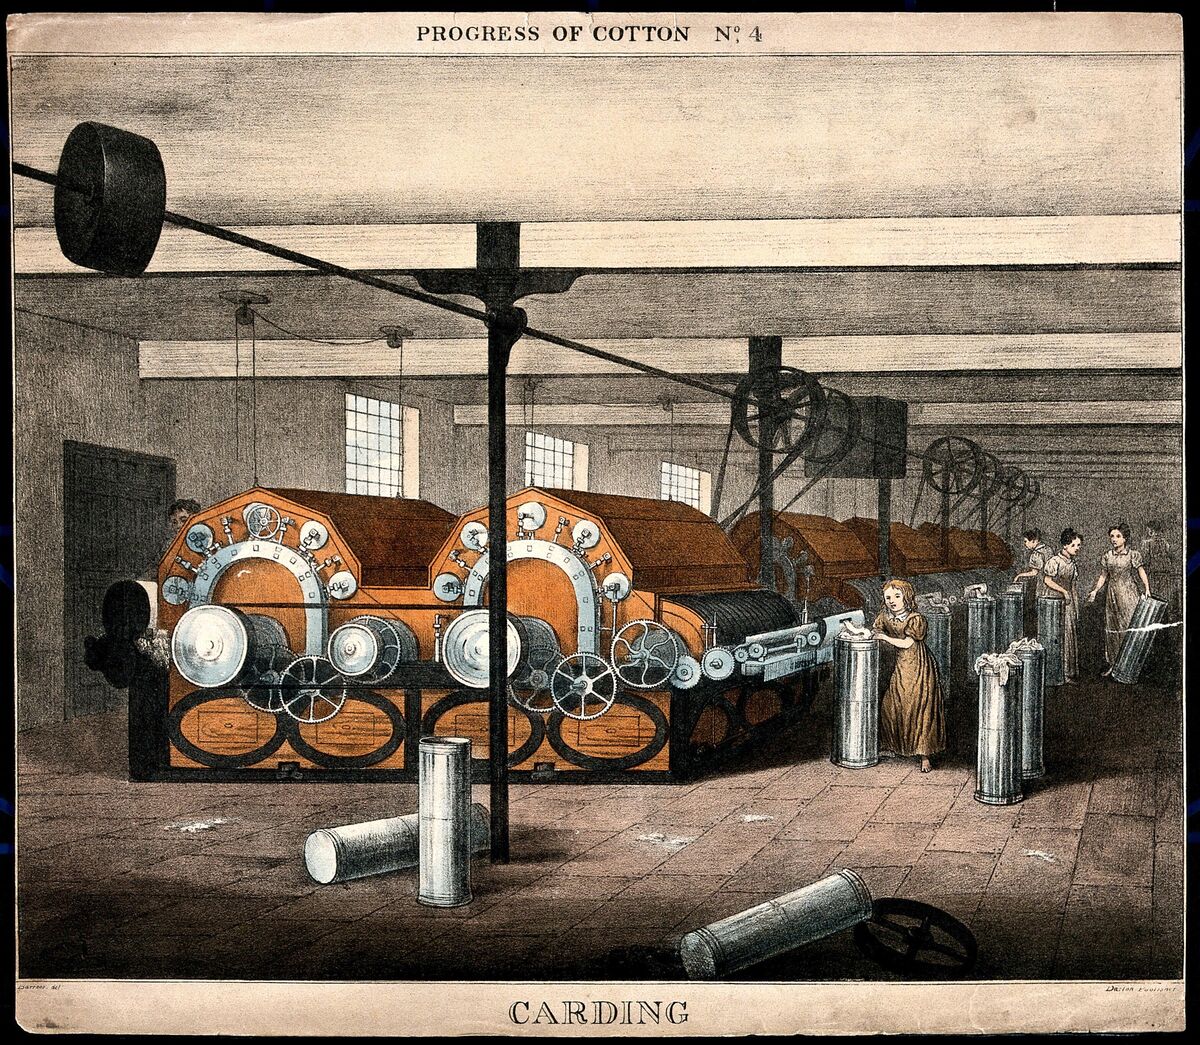 GFD 3/63: Women and children operating cotton-carding machines (coloured lithograph after James Richard Barfoot, c. 1840)